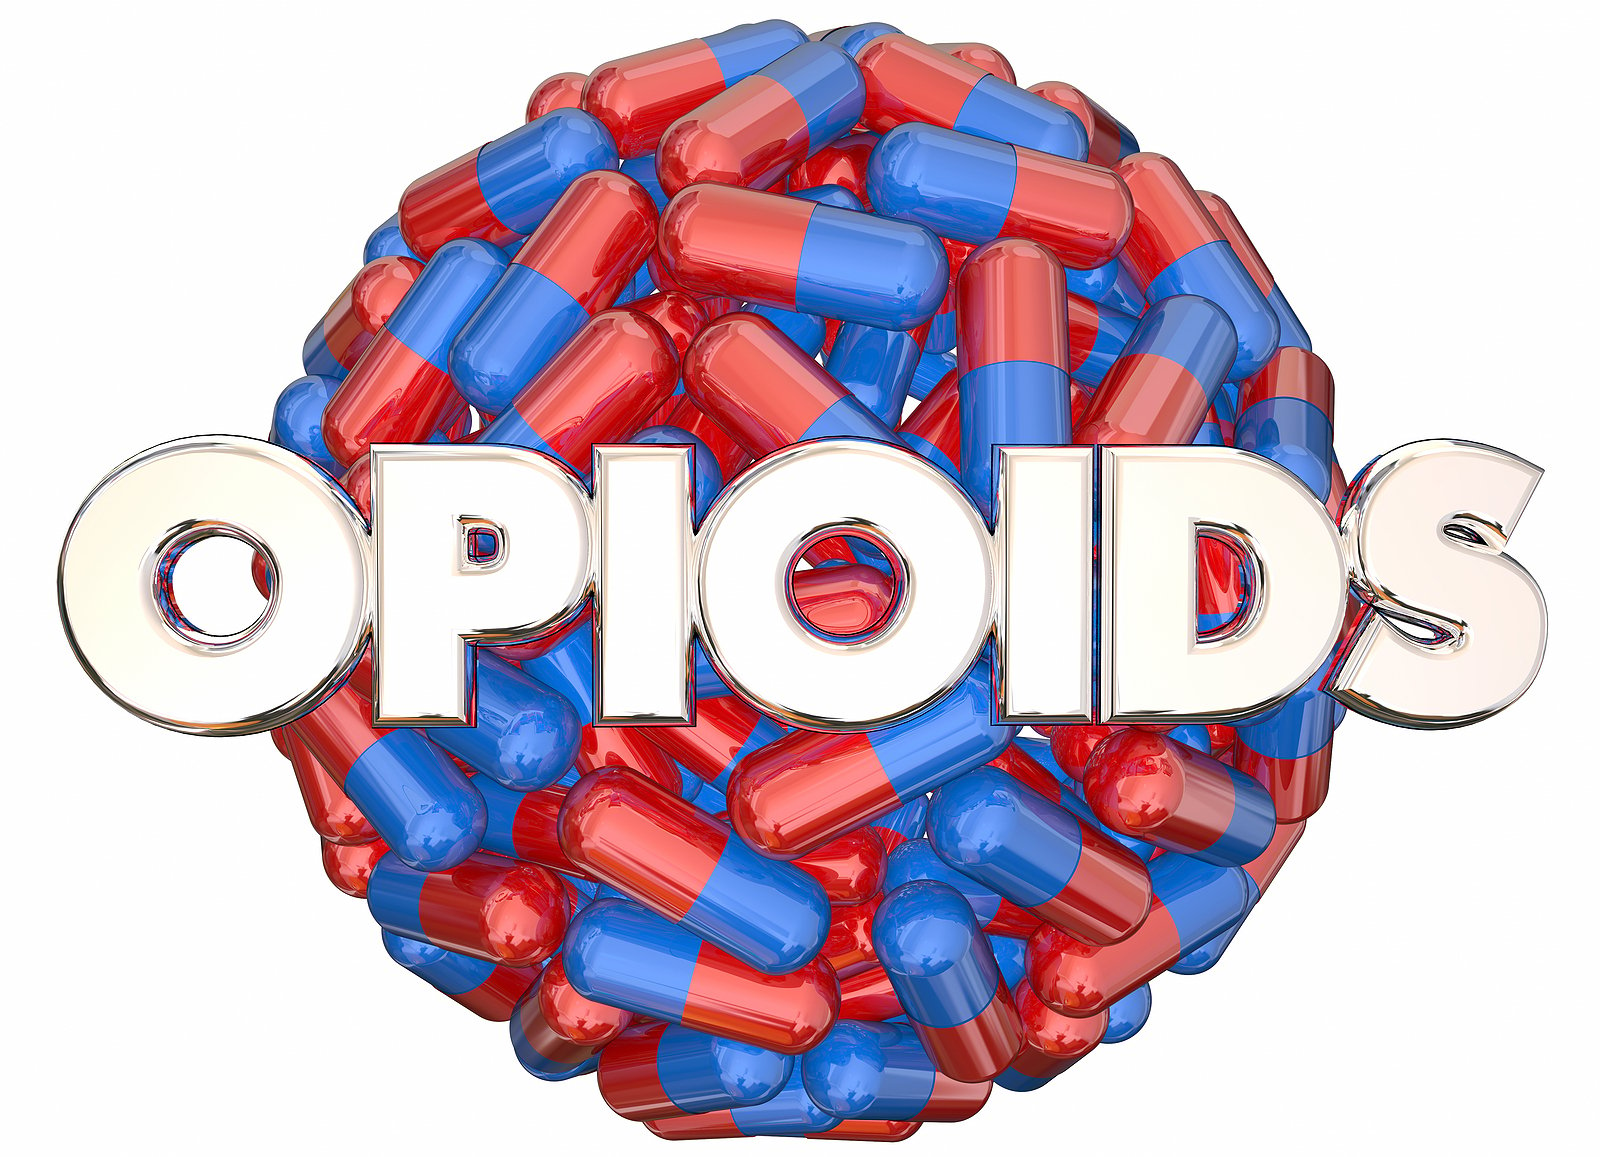 Get Ready! EW PharmD Reviews the 2021 Draft CDC Guidelines for Prescribing Opioids